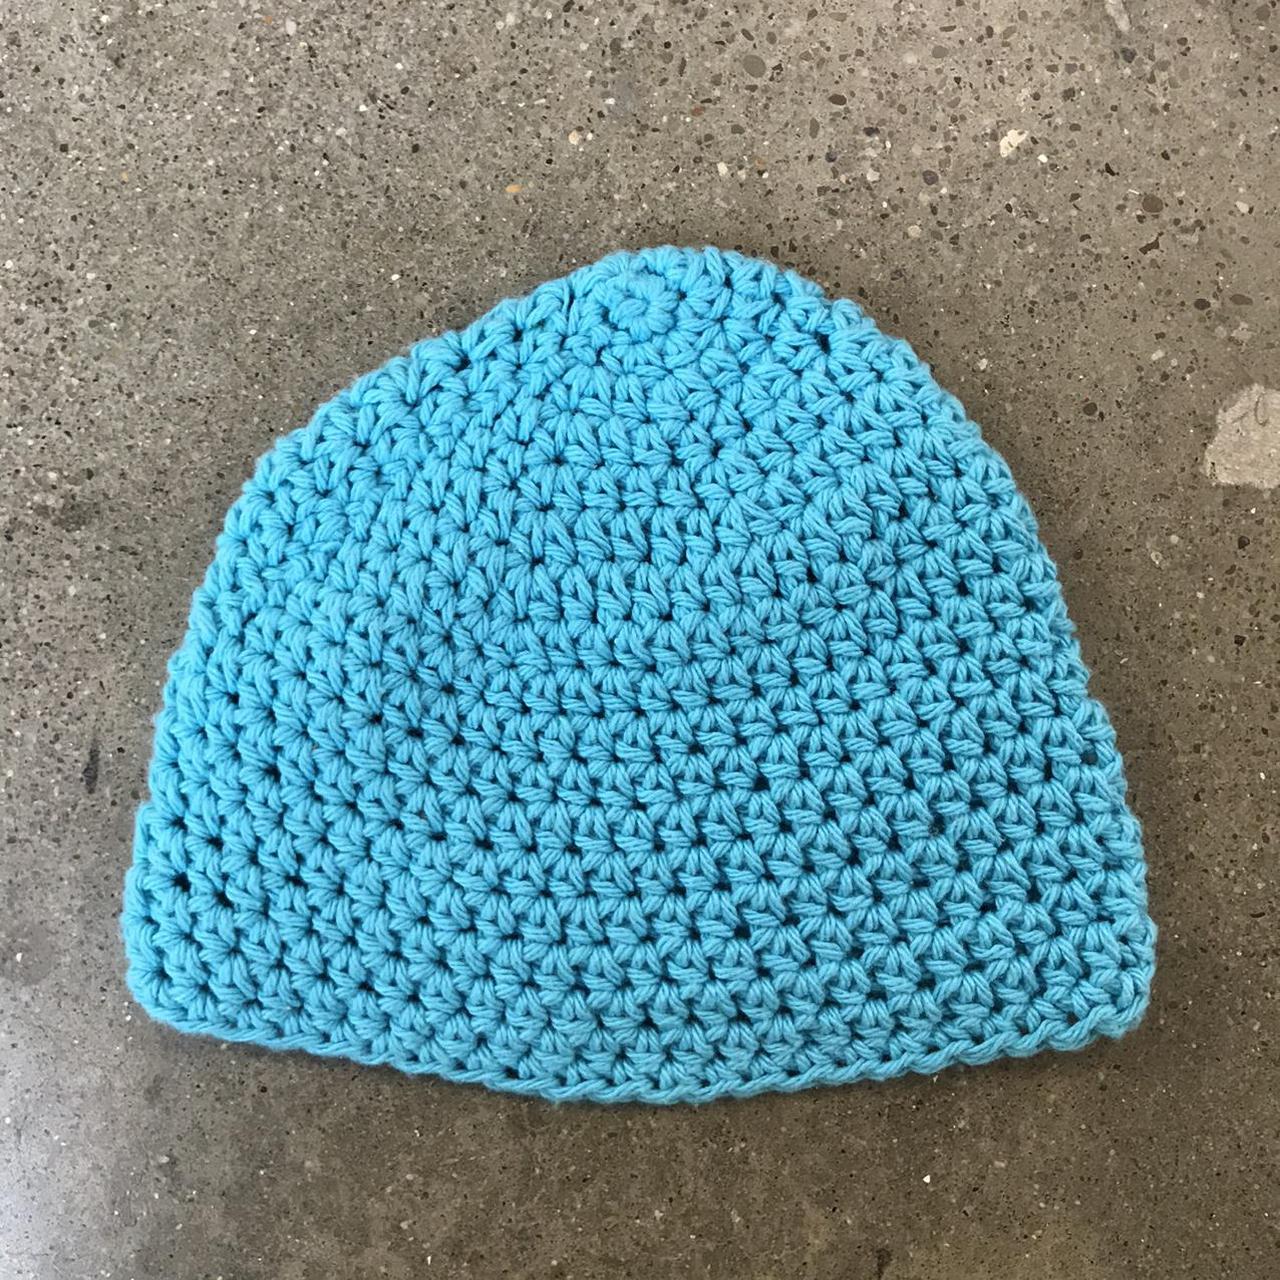 Product Image 2 - Handmade Handknit Crocheted Turquoise Blue